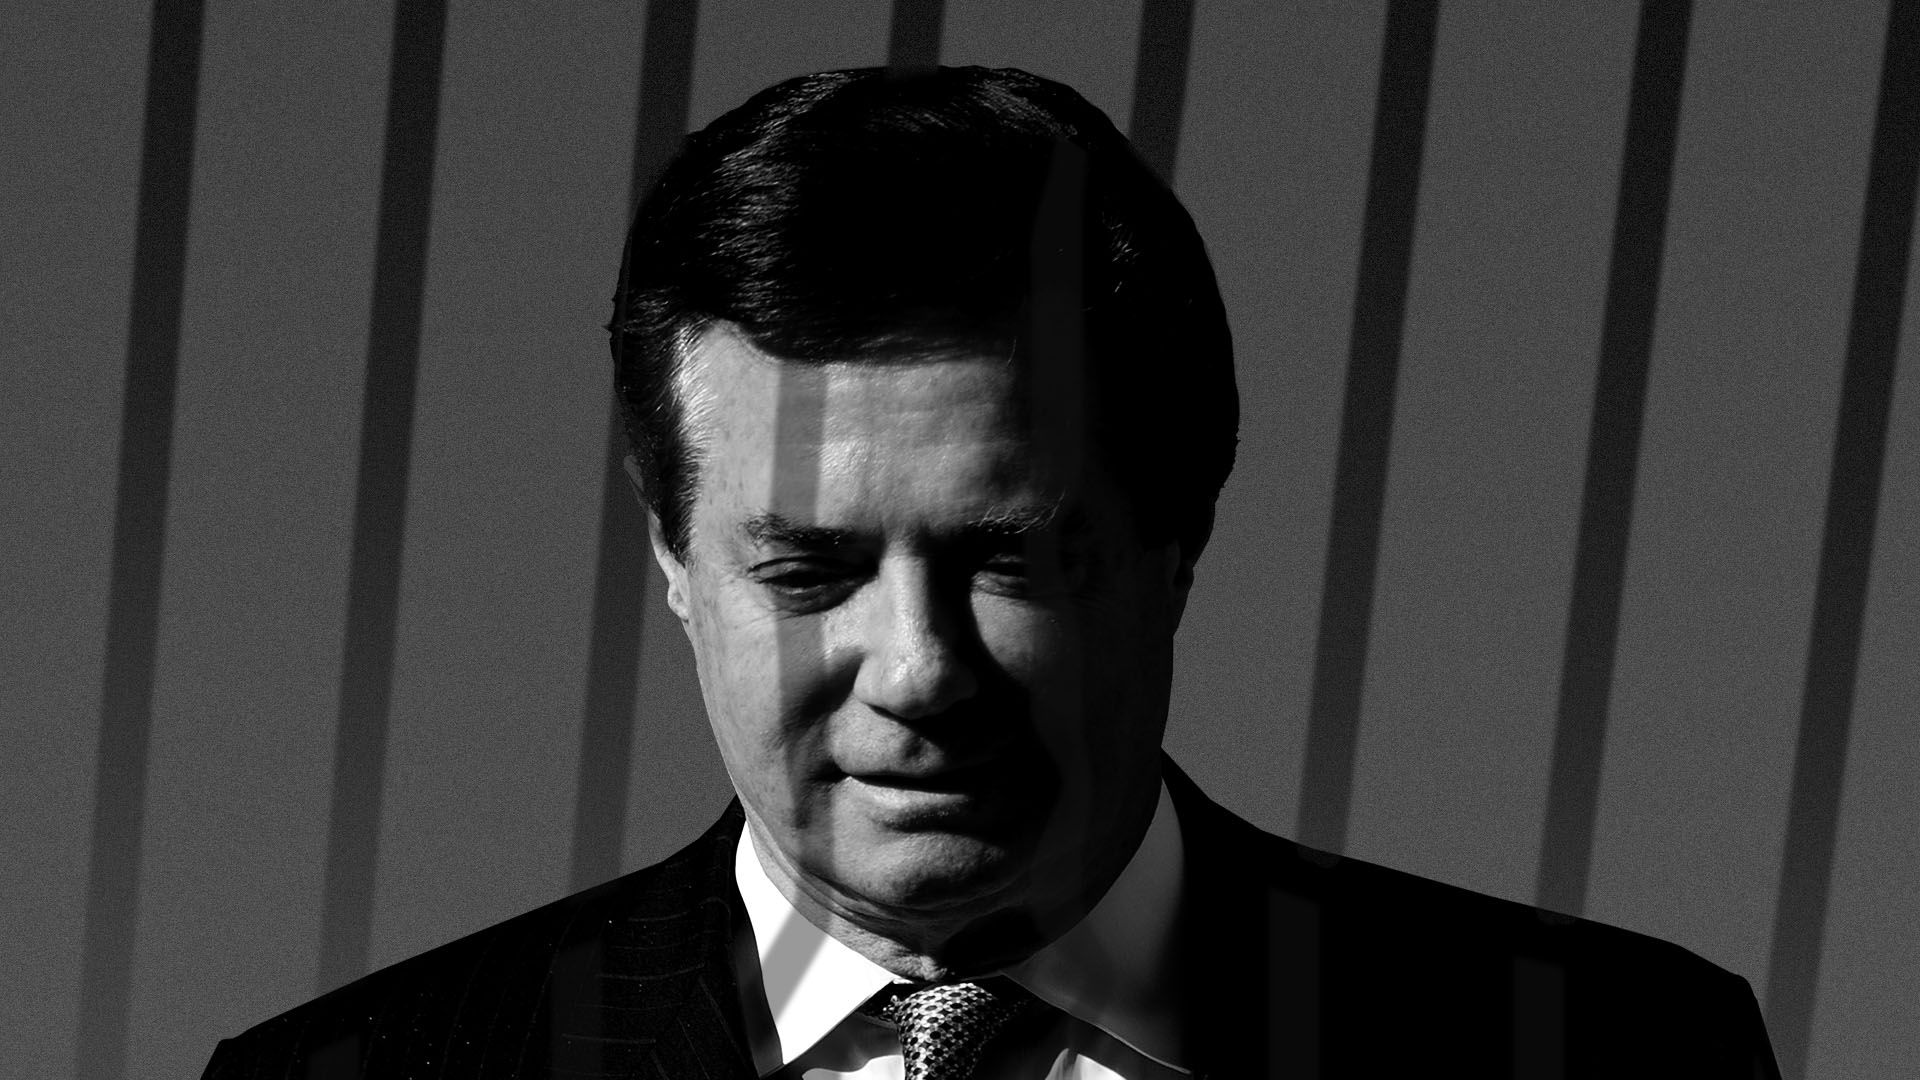 Illustration of Paul Manafort with shadows of jail bars over him